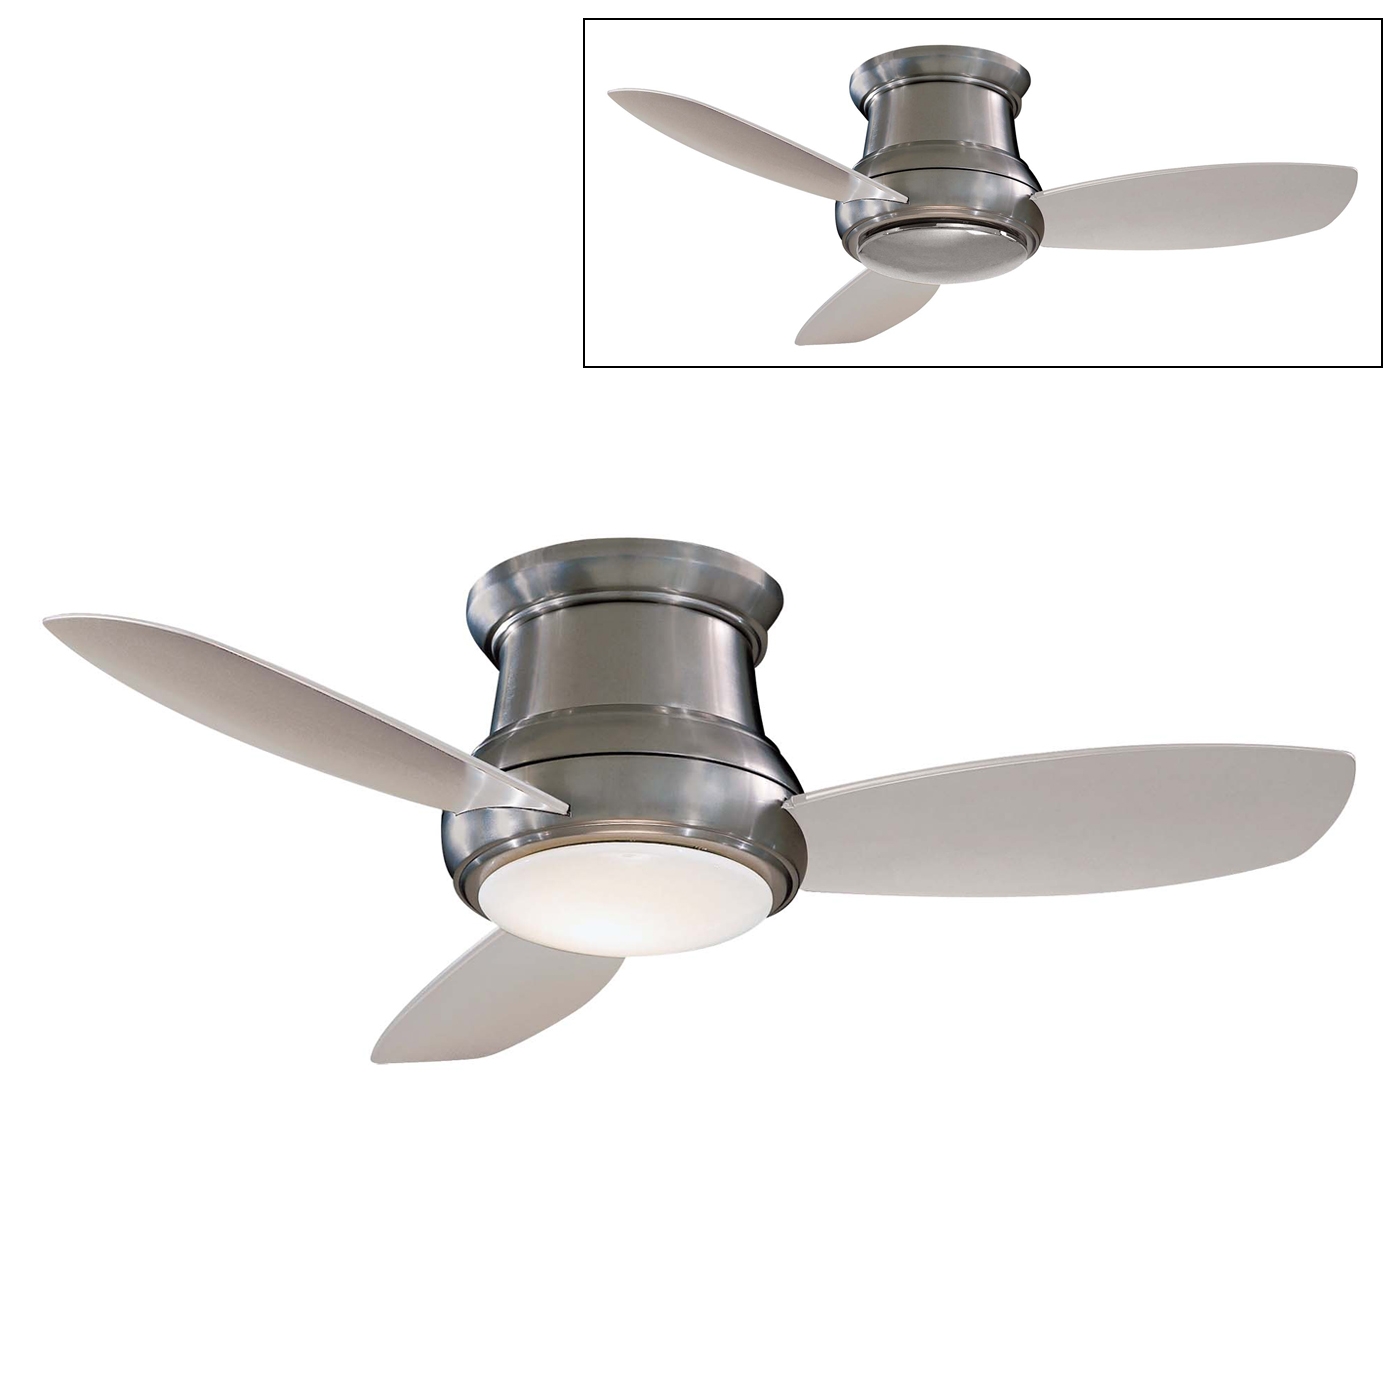 Permalink to Small Ceiling Fans With Remote Control And Light